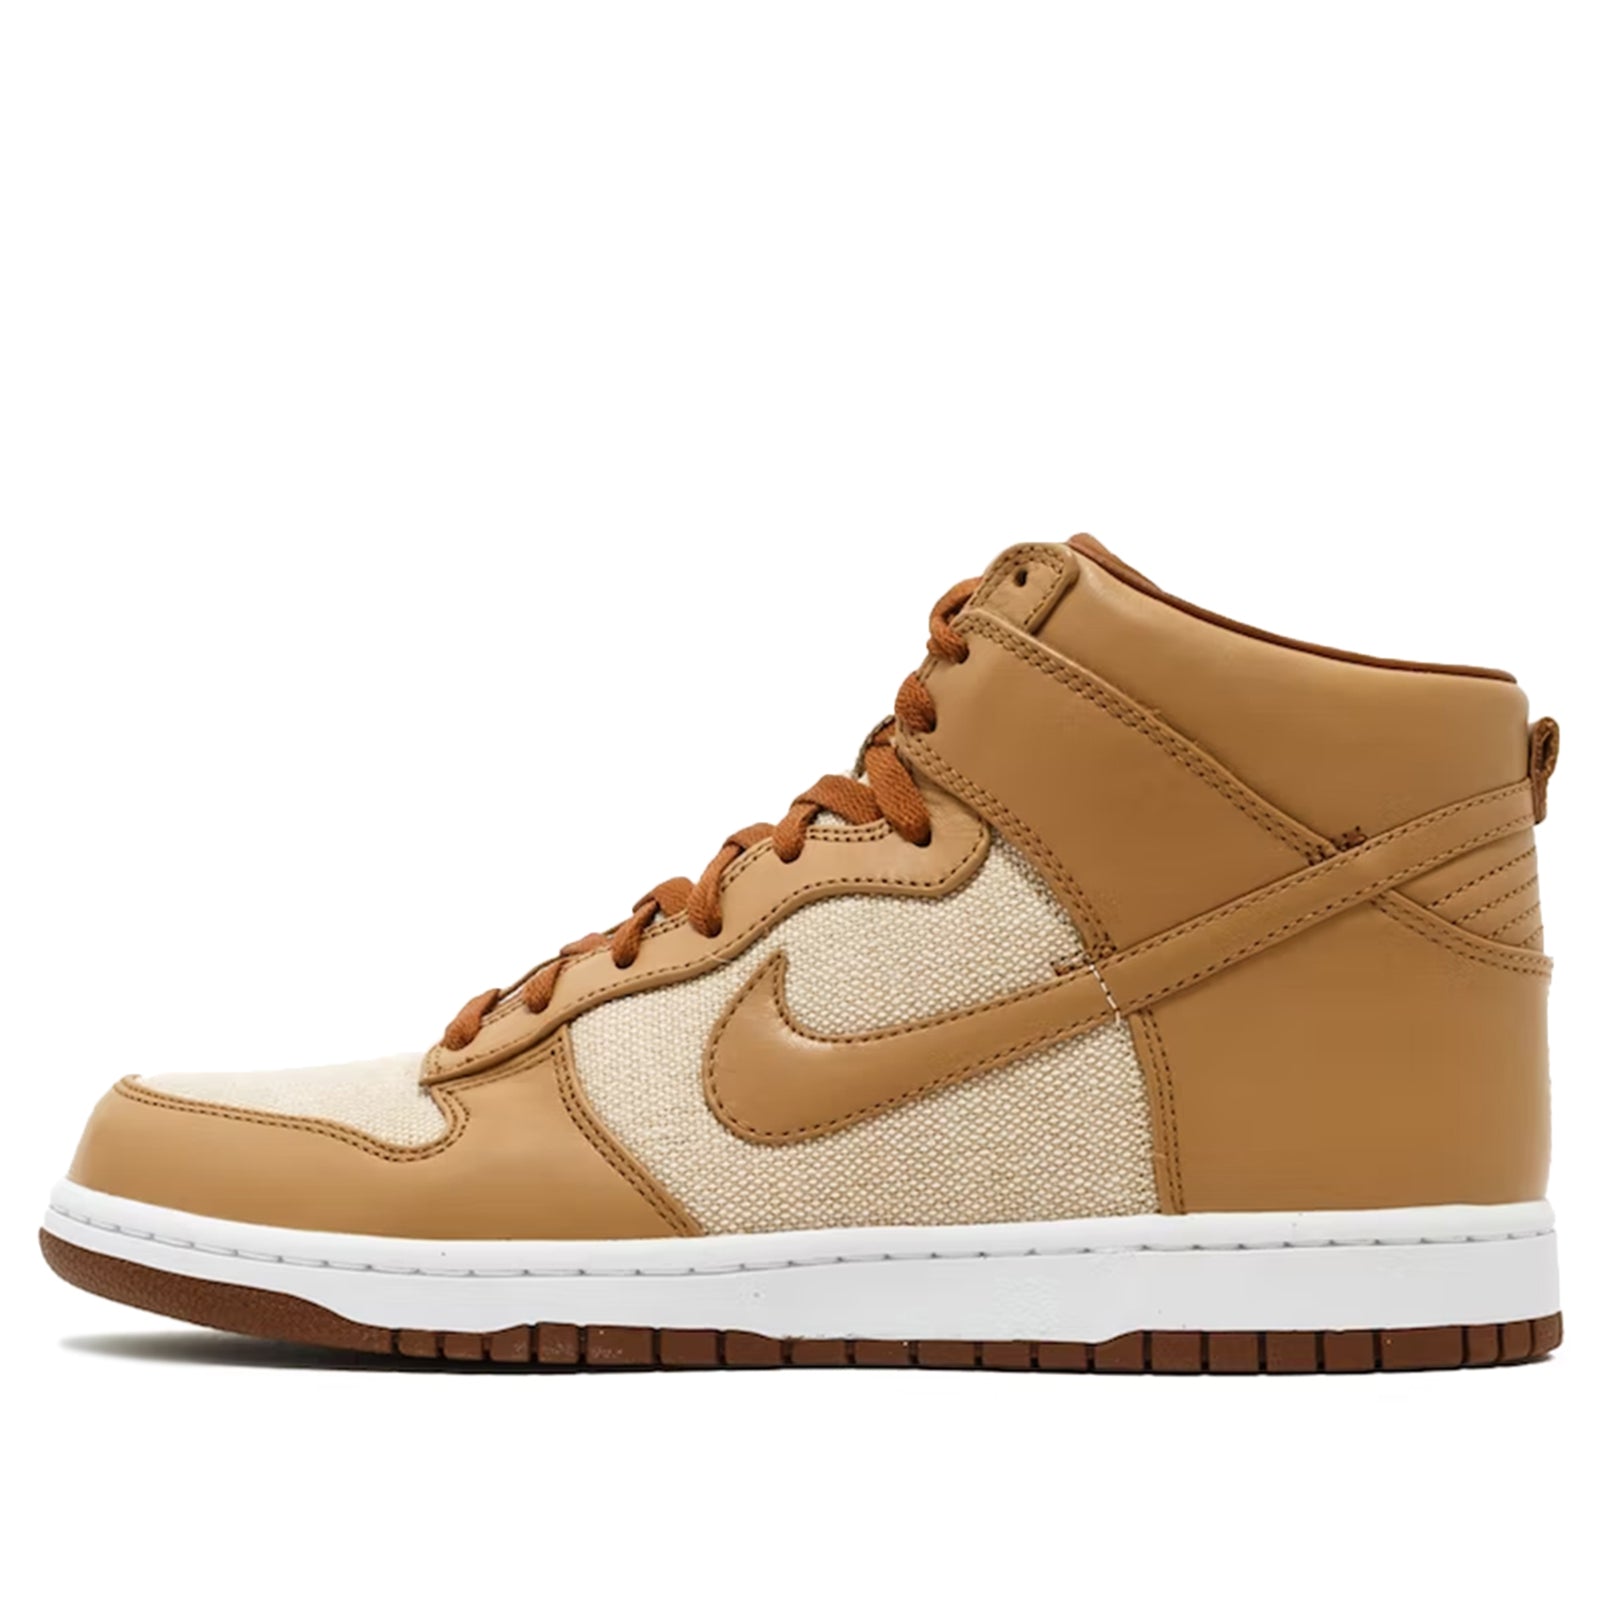 Nike Dunk High Premium Sp 'Acorn' 624512-101 Iconic Trainers - Click Image to Close